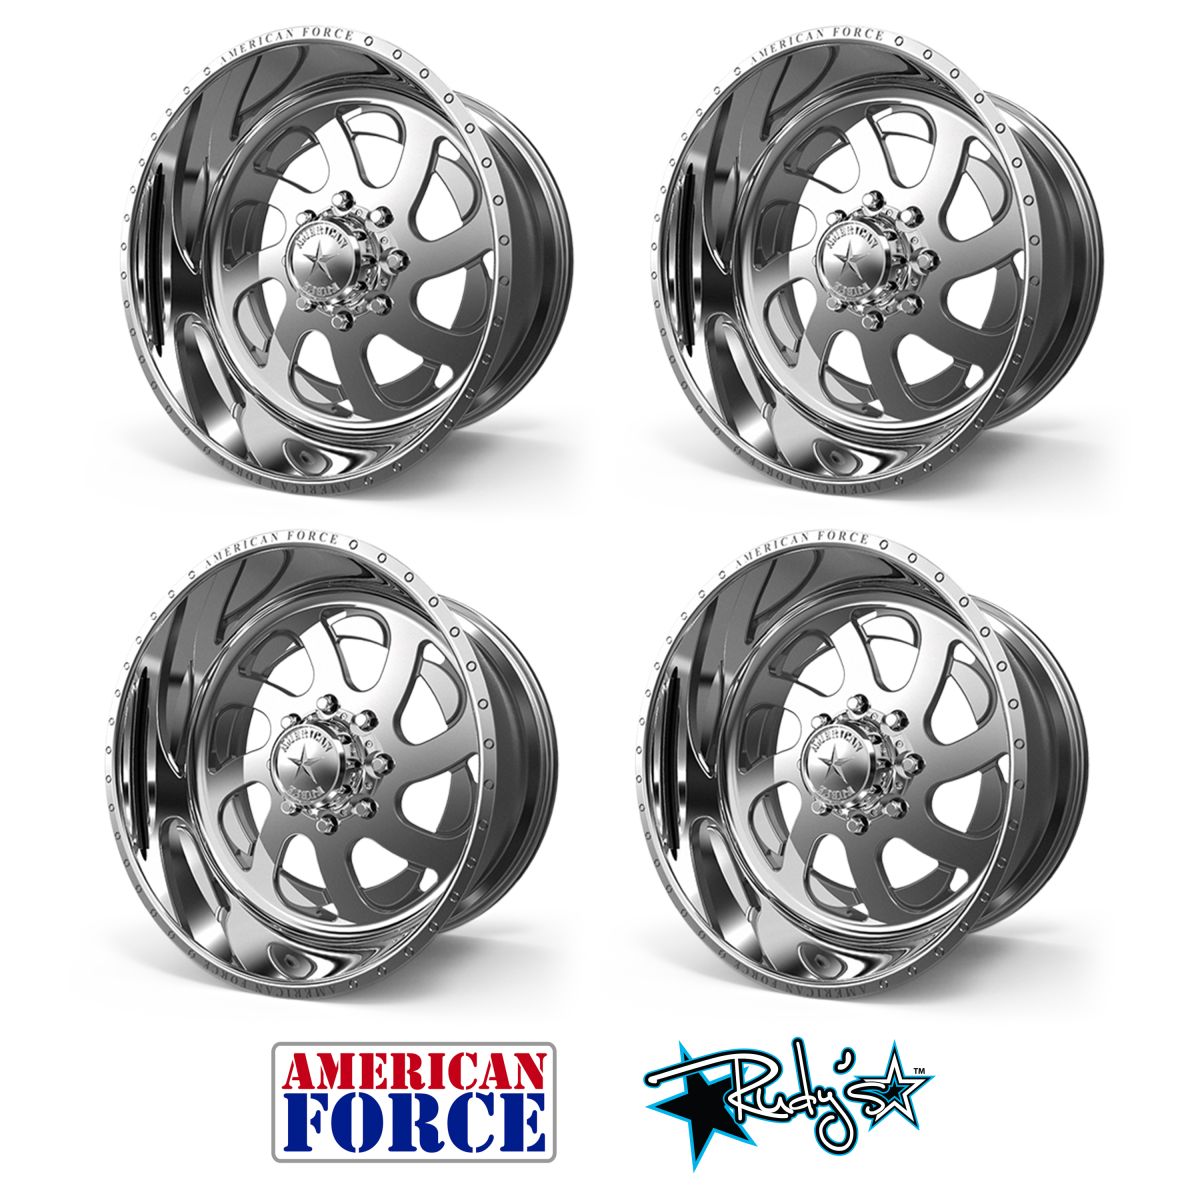 American Force - (4) American Force SS8 Ghost Wheels